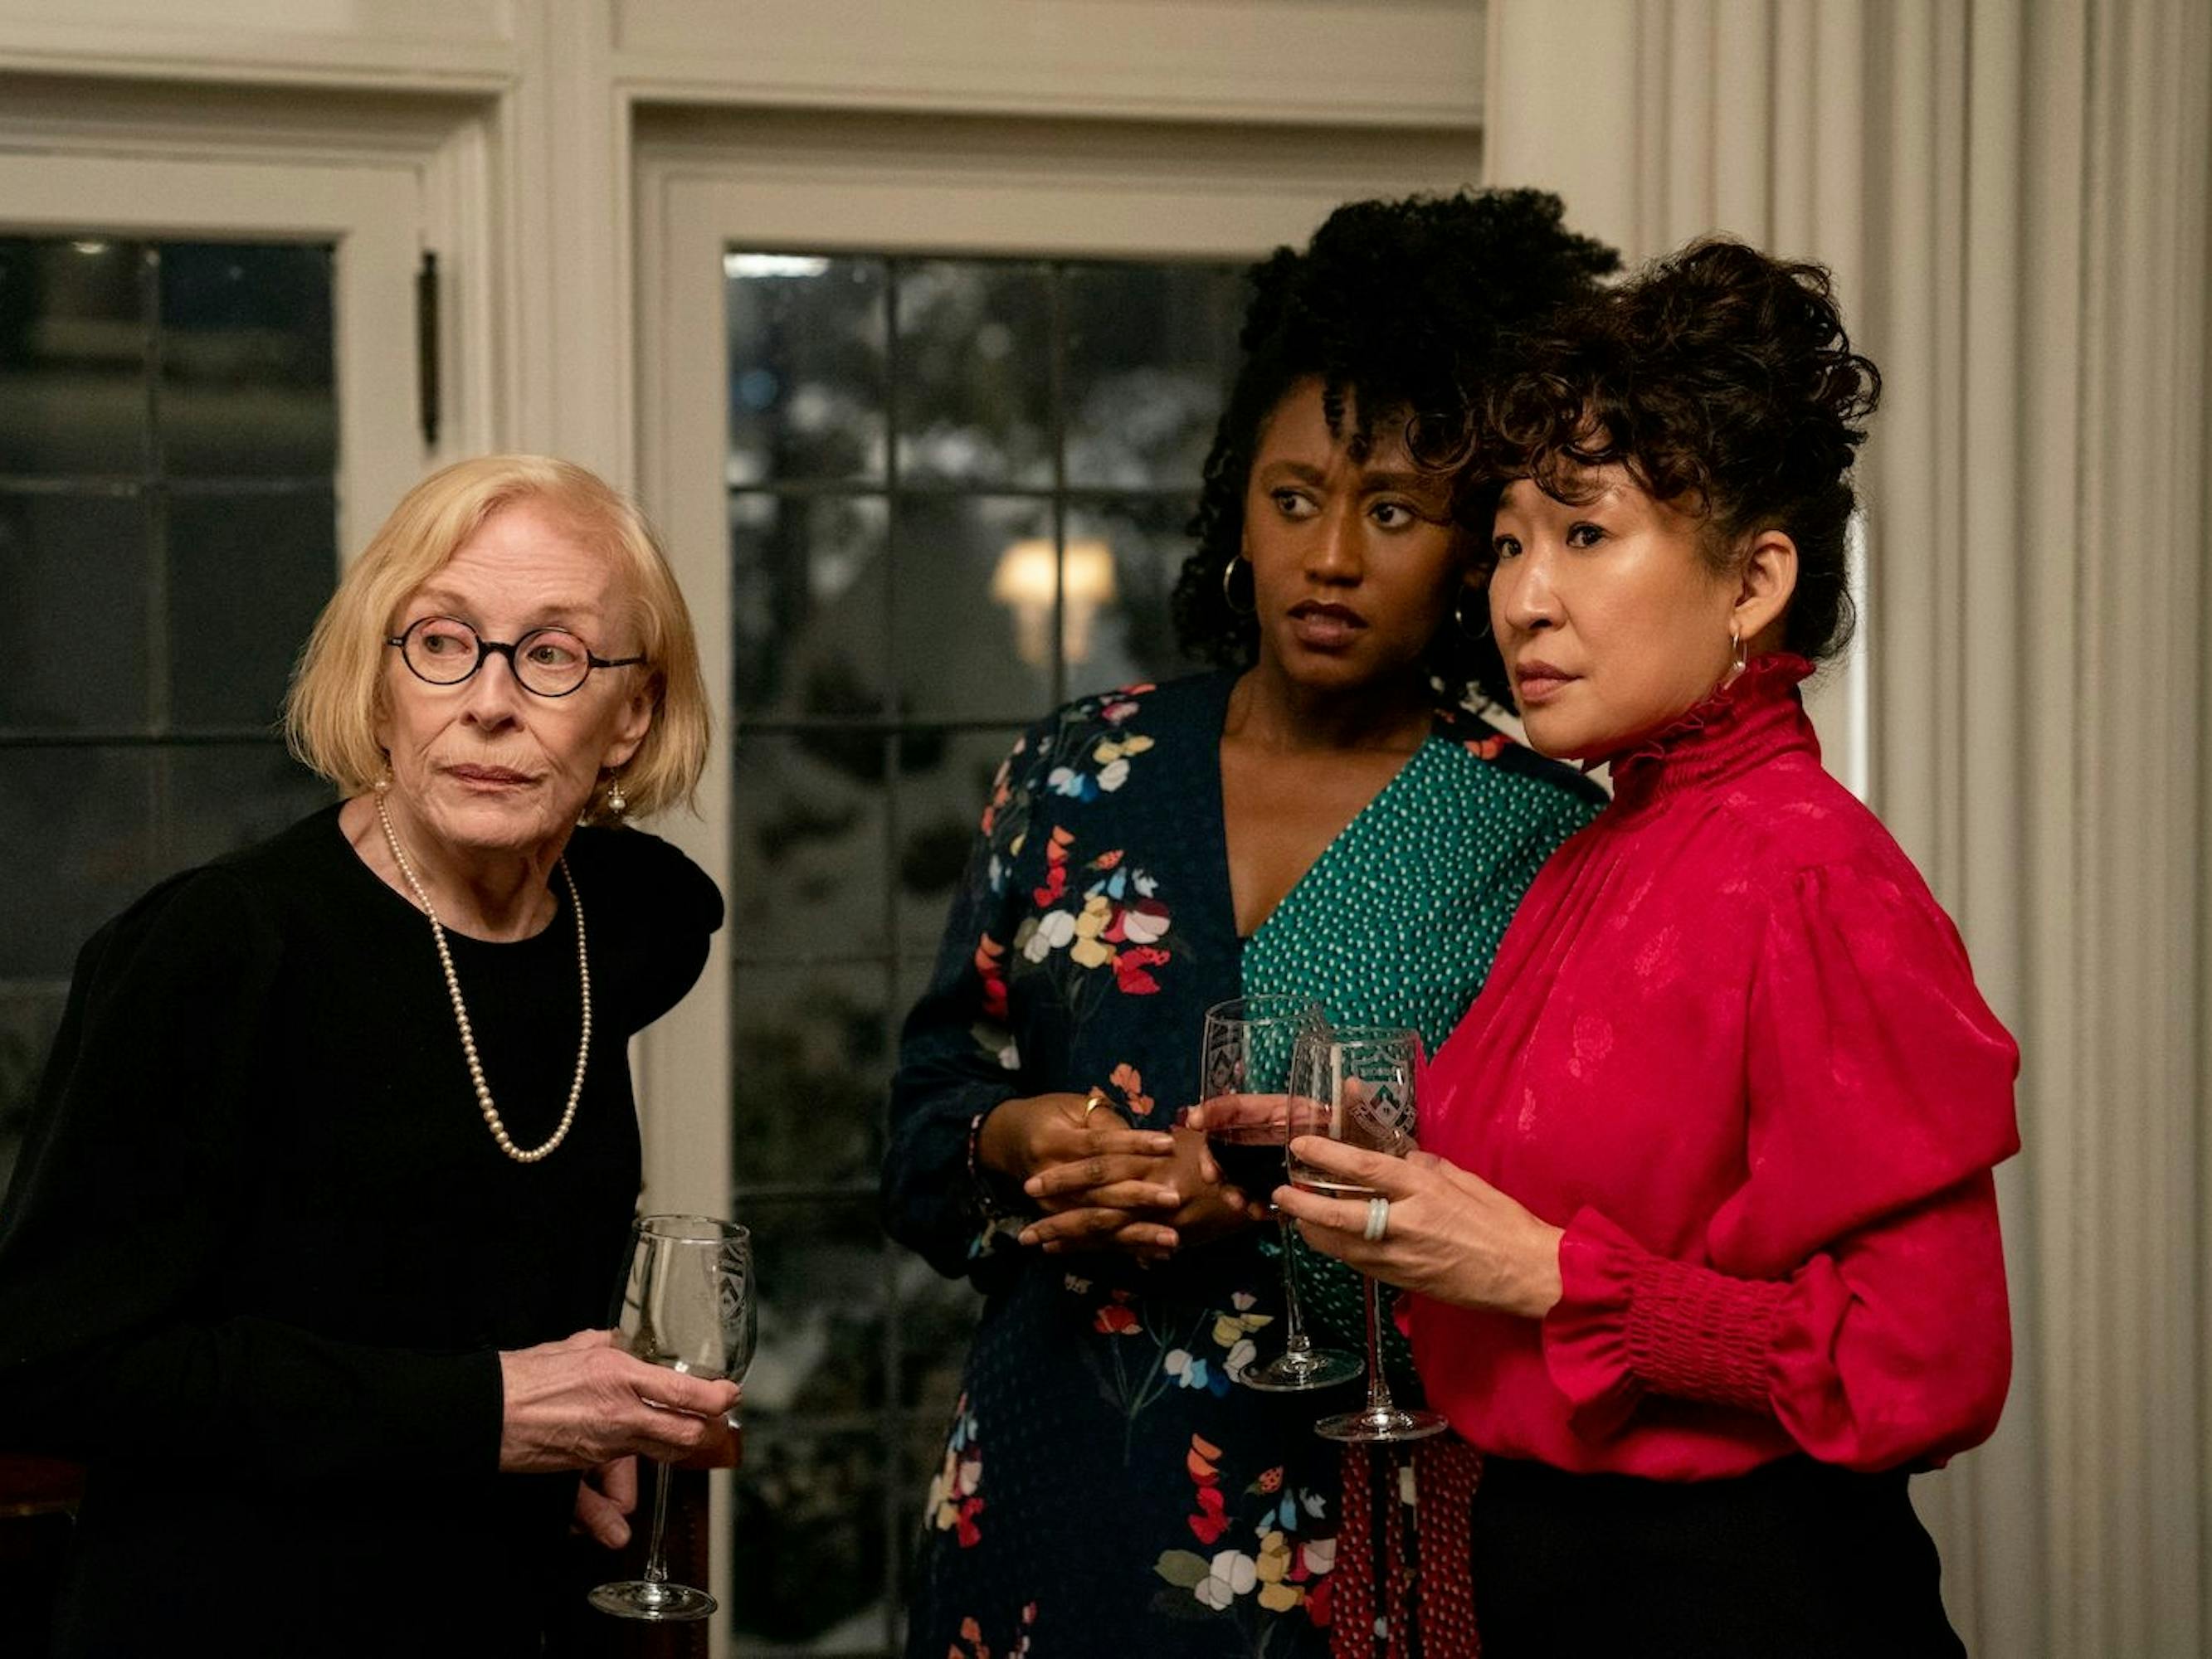 Joan Hambling (Holland Taylor), Yaz McKay (Nana Mensah), and Dr. Ji-Yoon Kim (Sandra Oh) in The Chair. The three women stand by a window discussing something off screen. Hambling wears a black outfit and glasses. McKay wears a floral top. Oh wears a red blouse and has an updo.